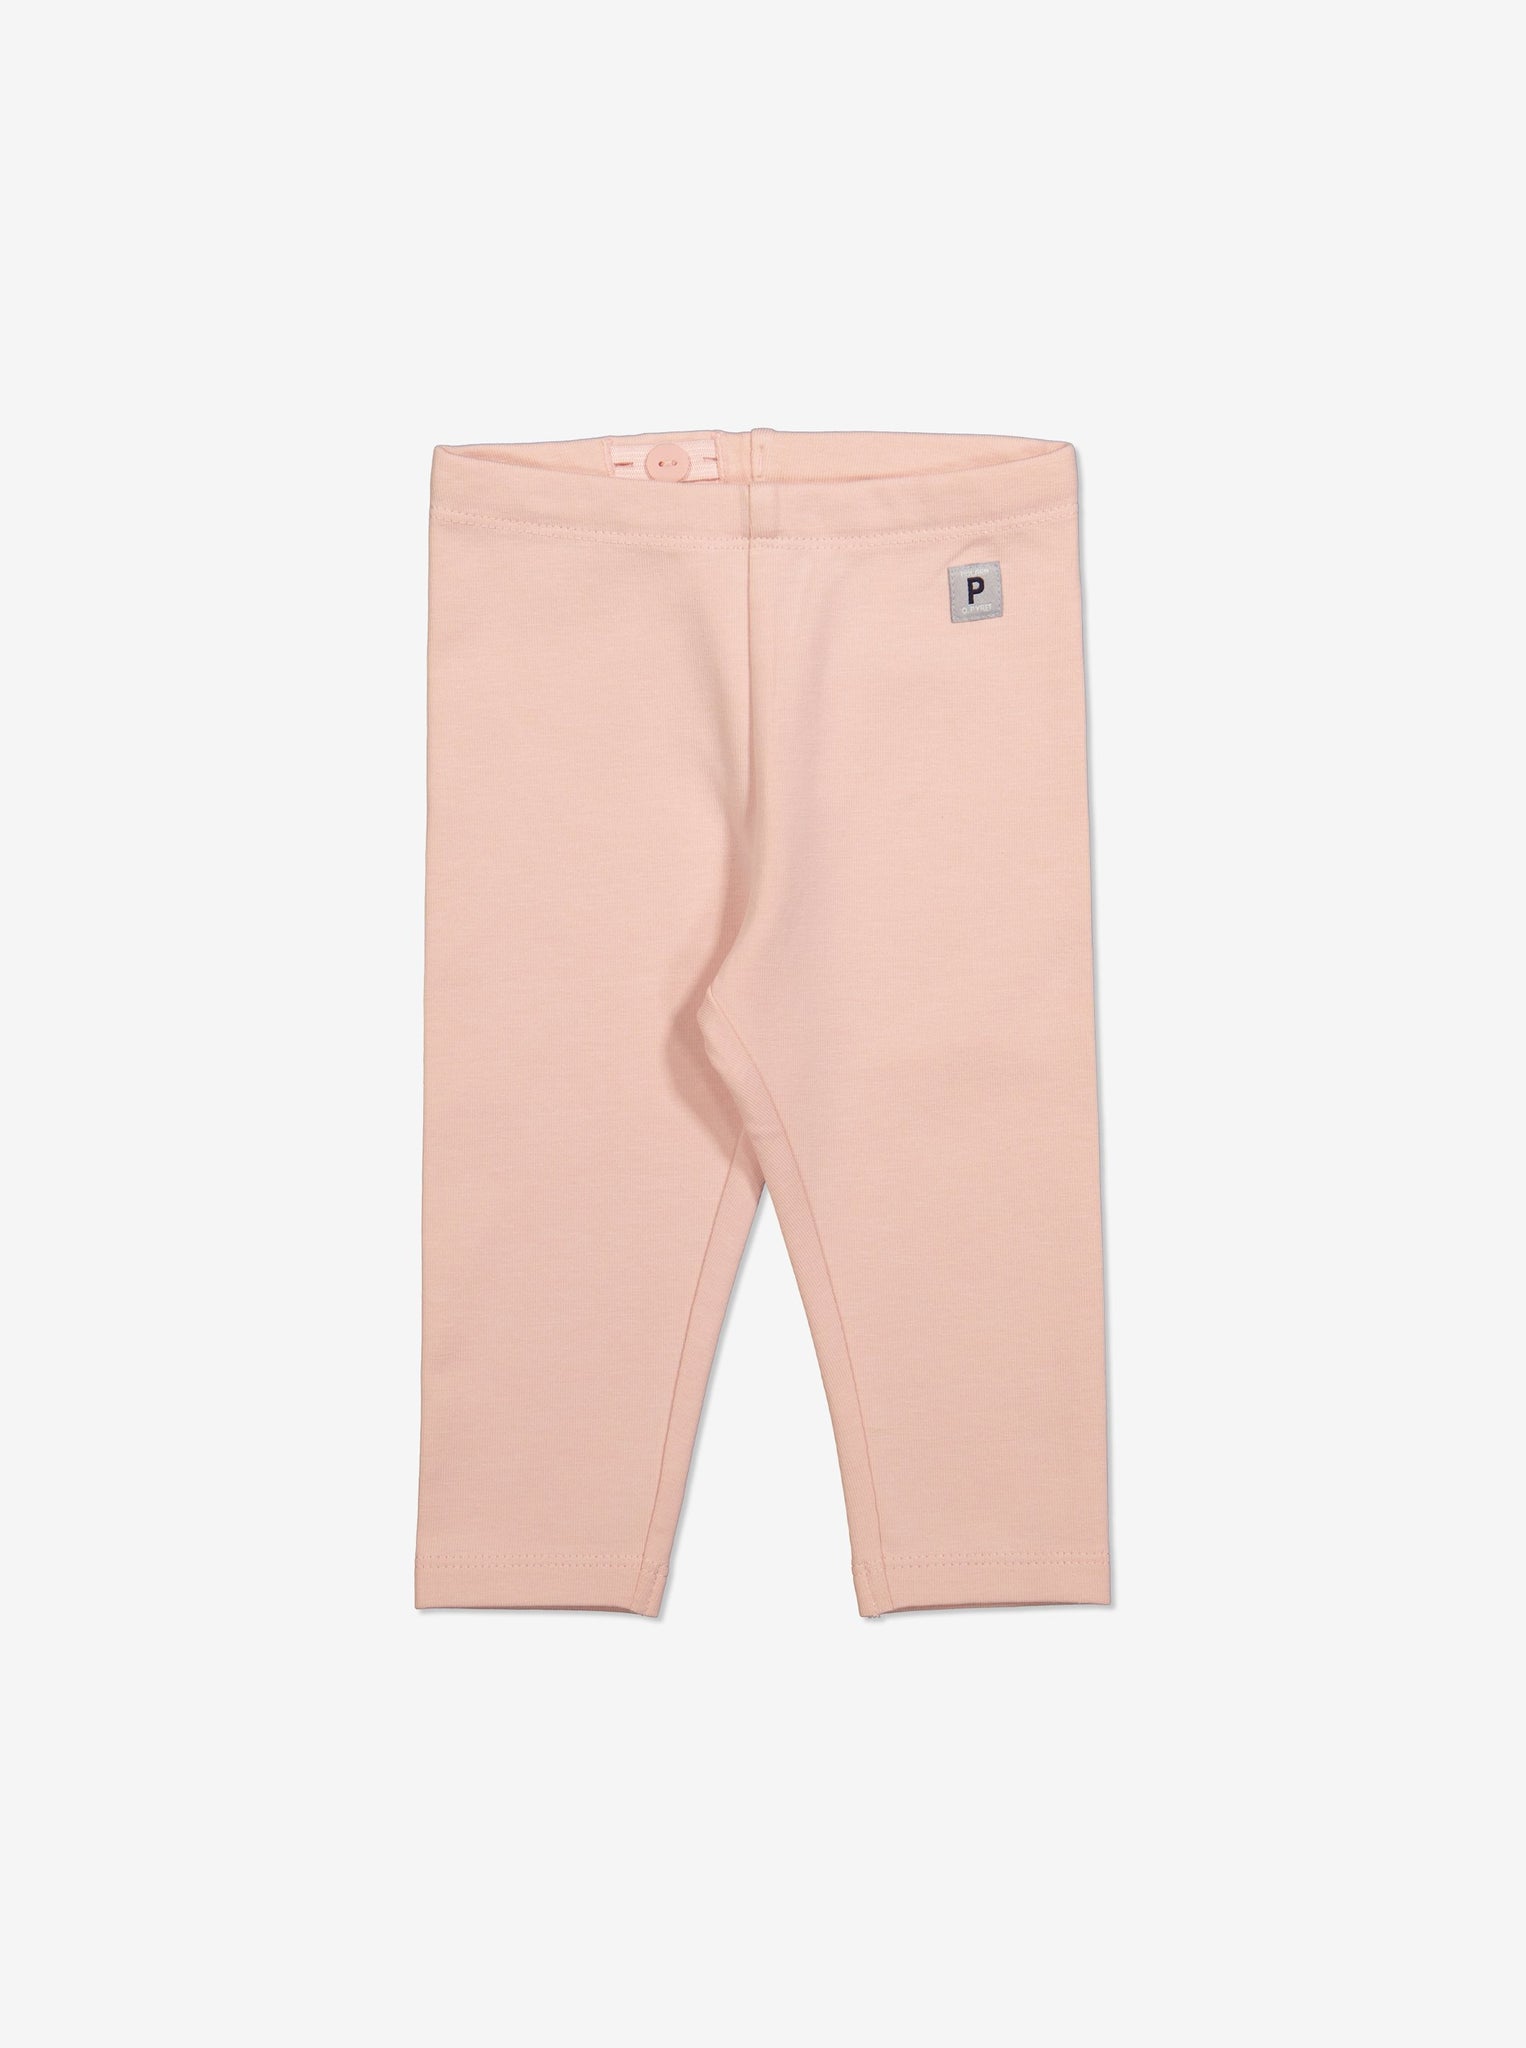  Organic Cotton Peach Baby Leggings from Polarn O. Pyret Kidswear. Made from eco-friendly materials.